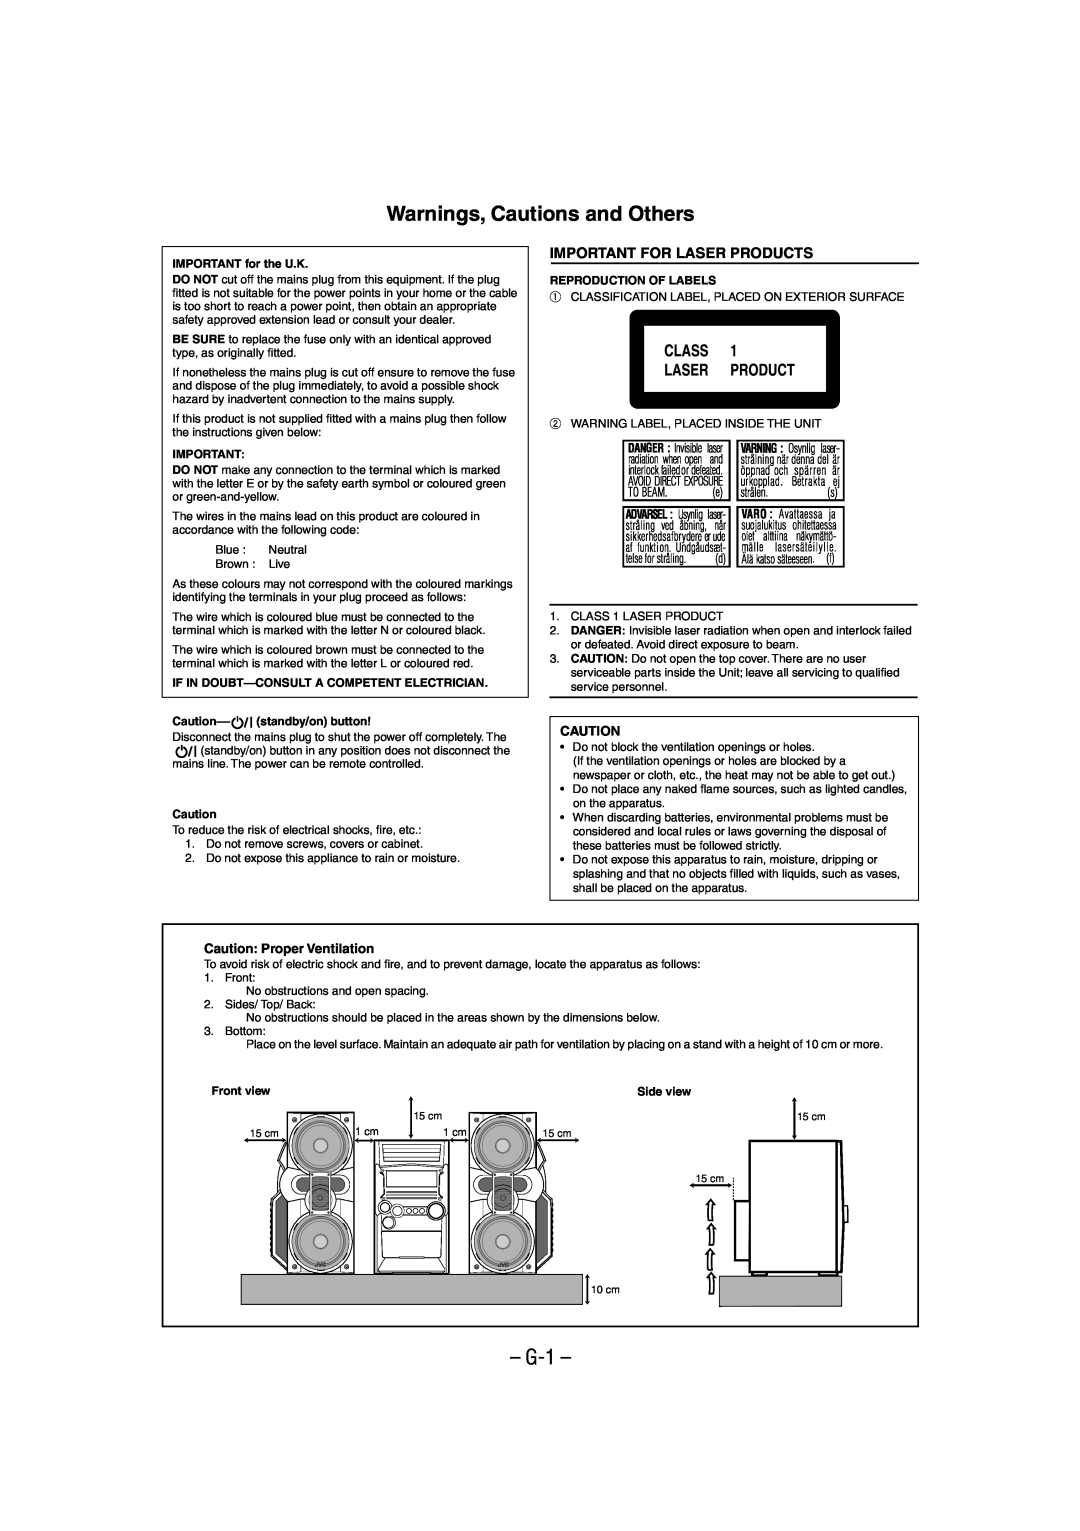 JVC GVT0086-008A manual Warnings, Cautions and Others, G-1, Caution Proper Ventilation, IMPORTANT for the U.K, Front view 